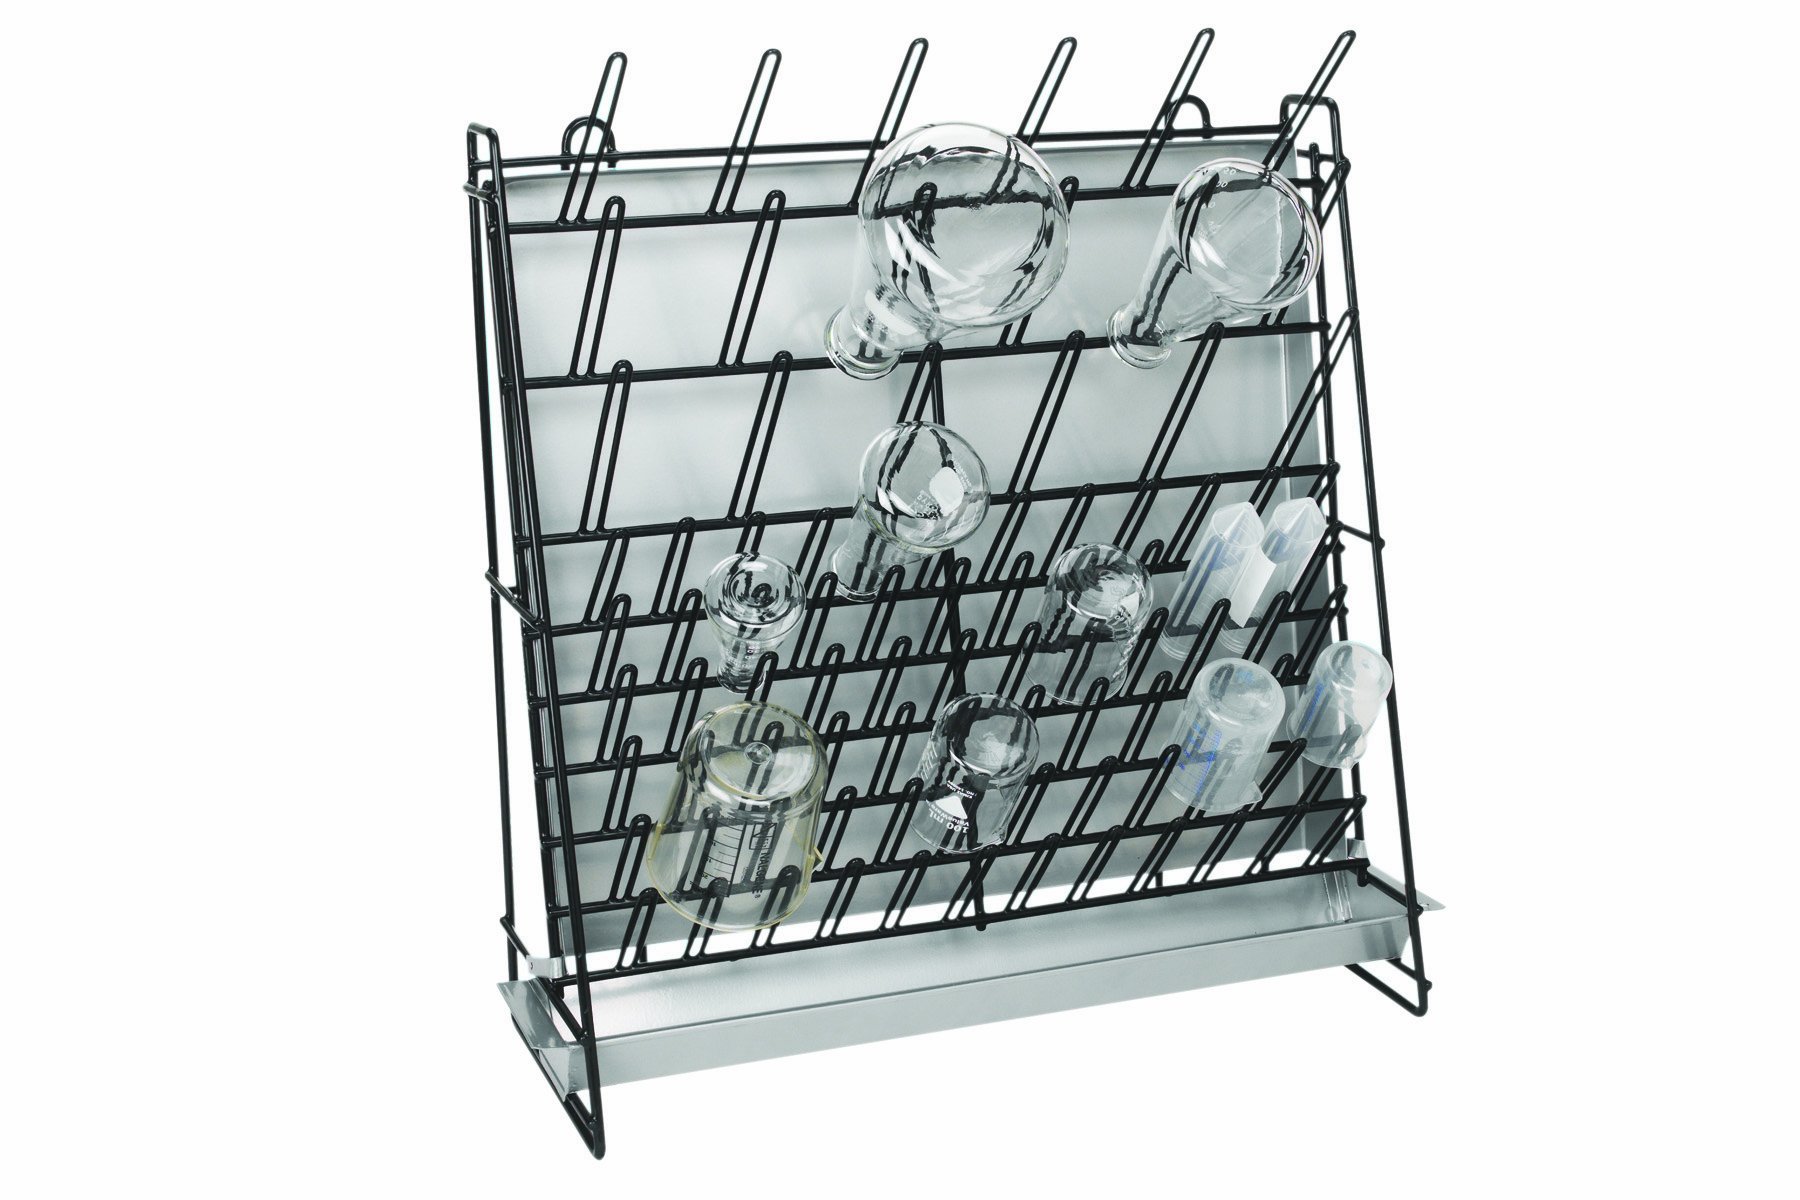 Heathrow Scientific HS23243A Glassware Drying Rack, 90 Pegs, Vinyl-Coated Steel Wire Construction, Self-Standing or Wall-Mountable